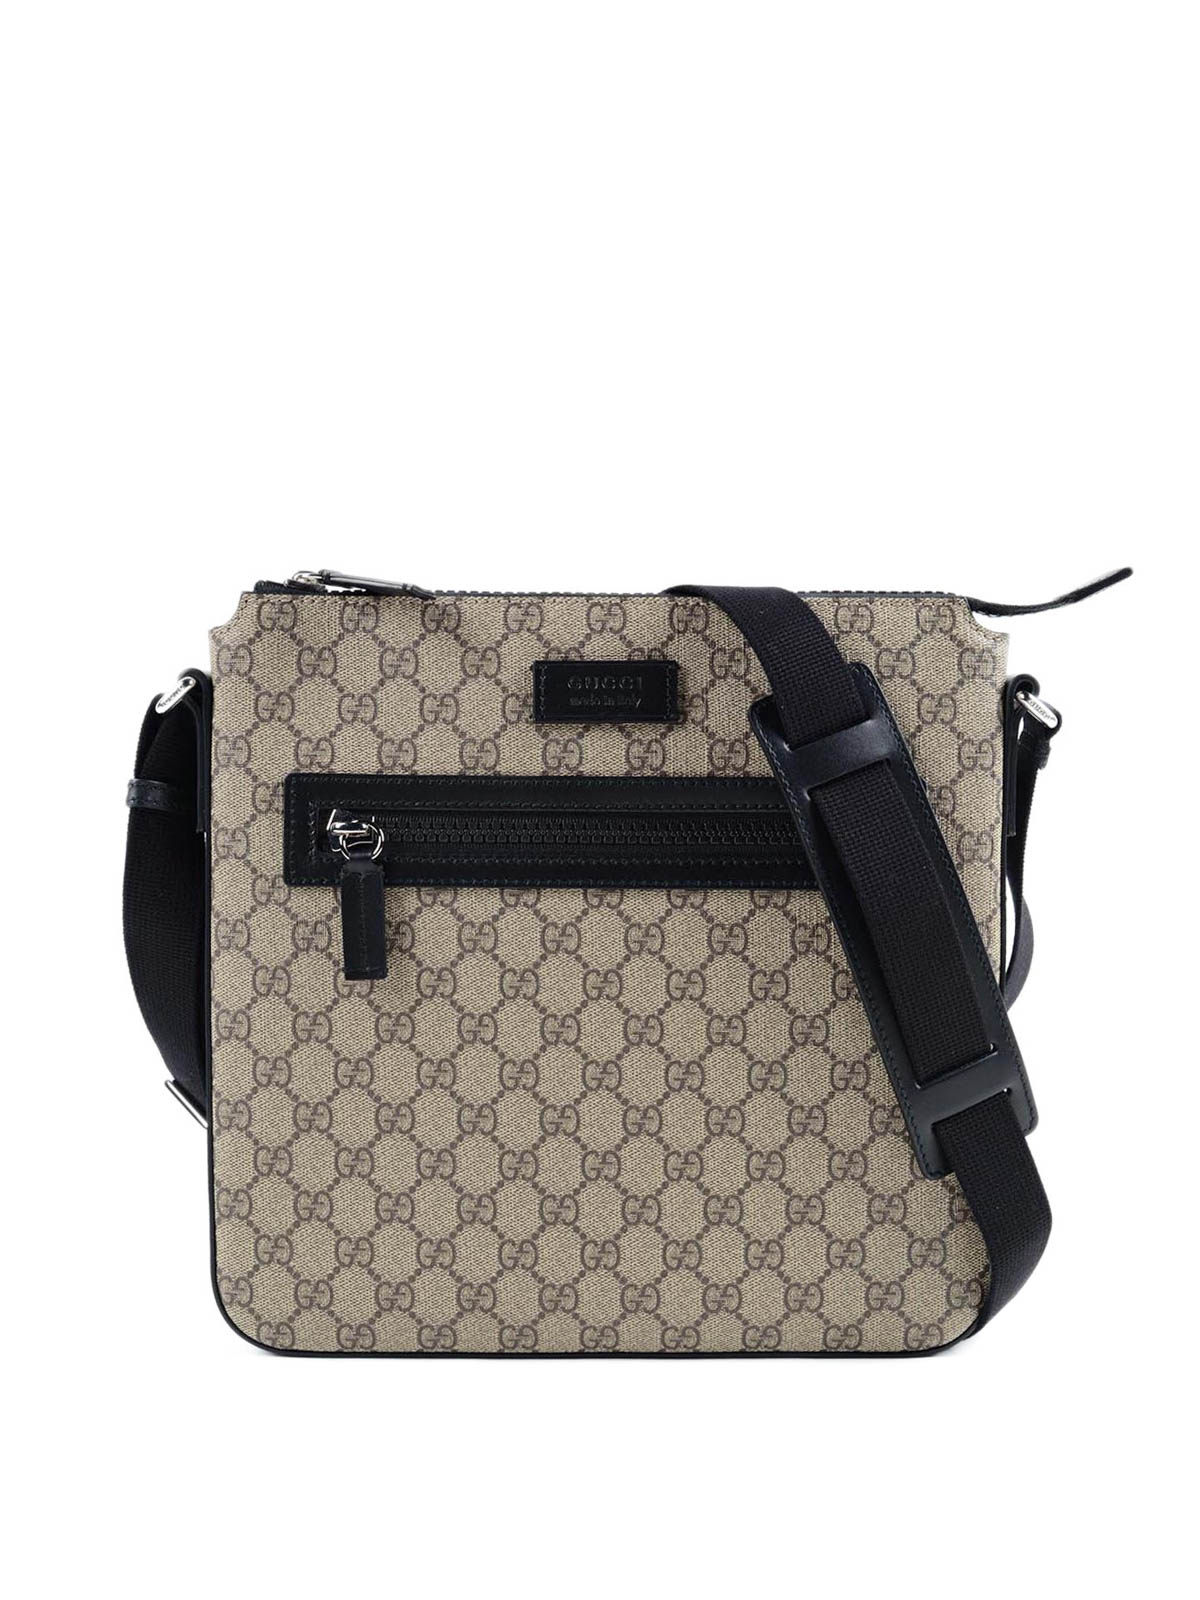 GG Supreme crossbody by Gucci - cross body bags | Shop online at 0